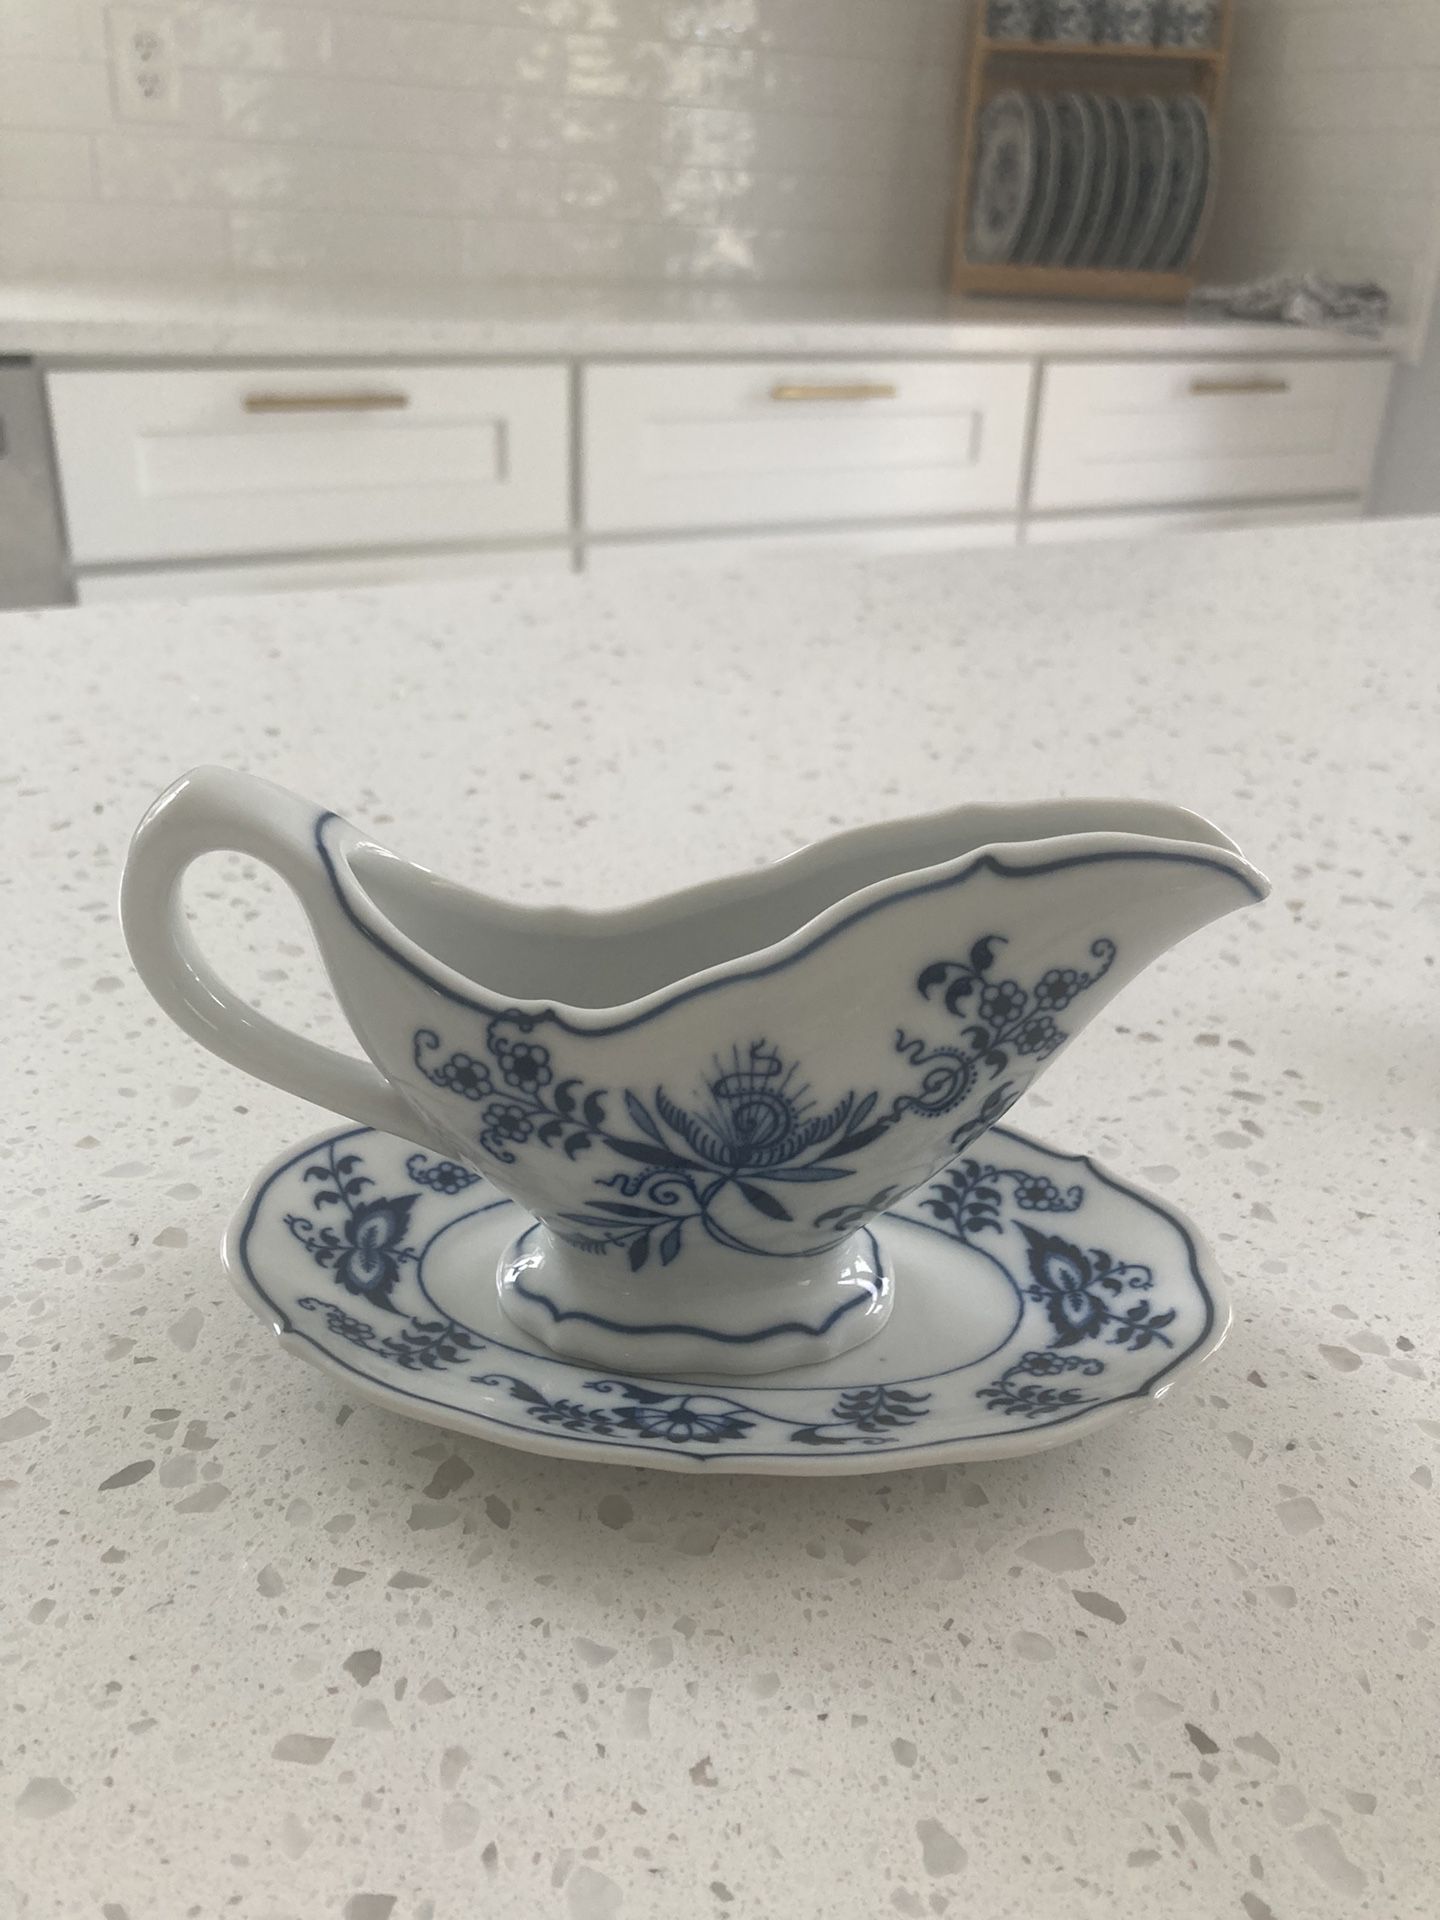 Vintage Blue Danube individual sauce/Gravy Boat with saucer.